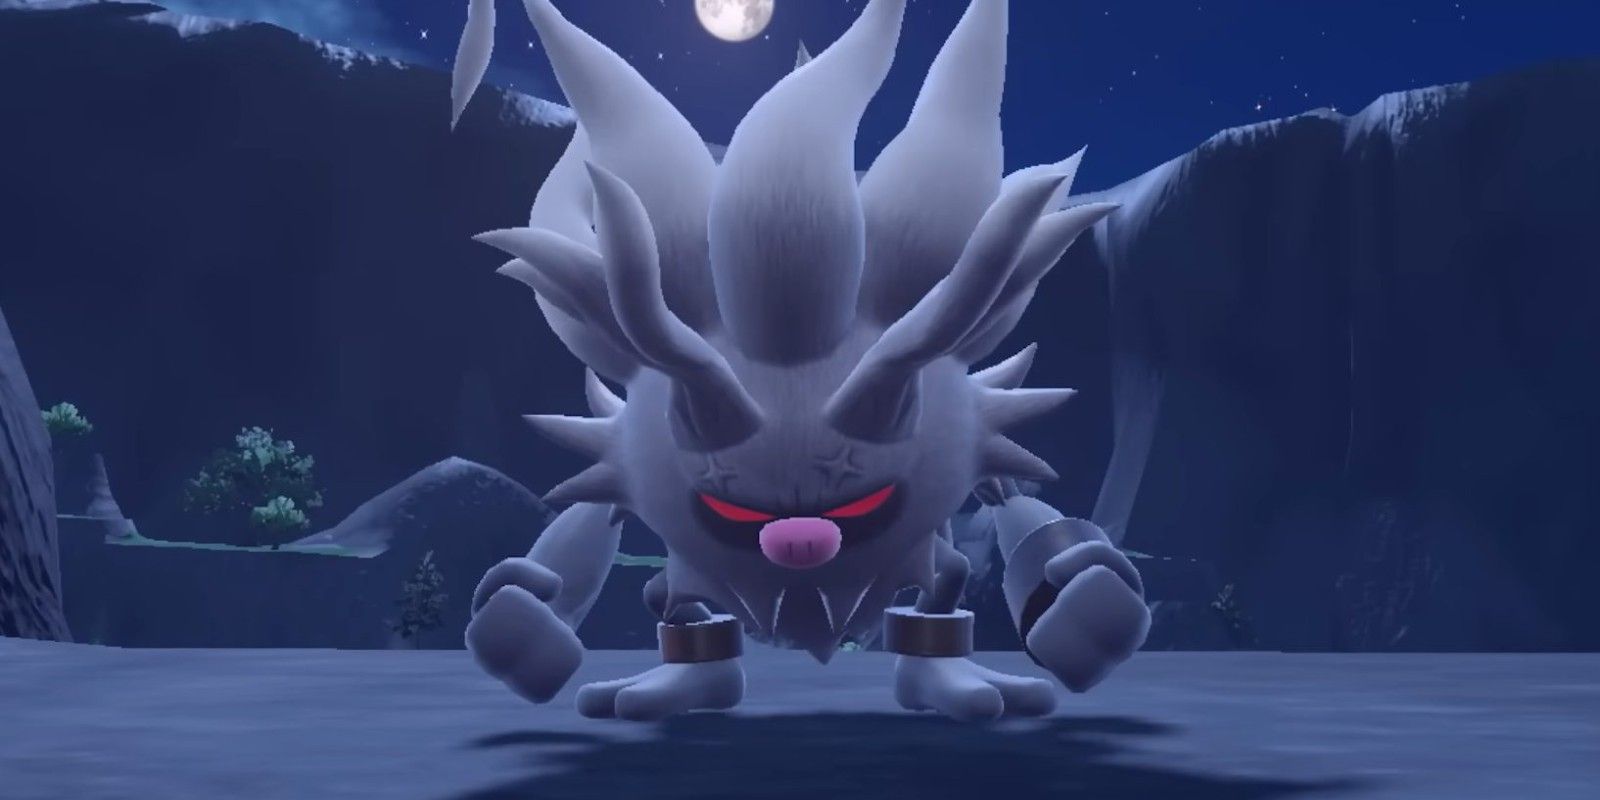 An Annihilape in Pokémon Scarlet and Violet, standing in a valley at night under the moon.